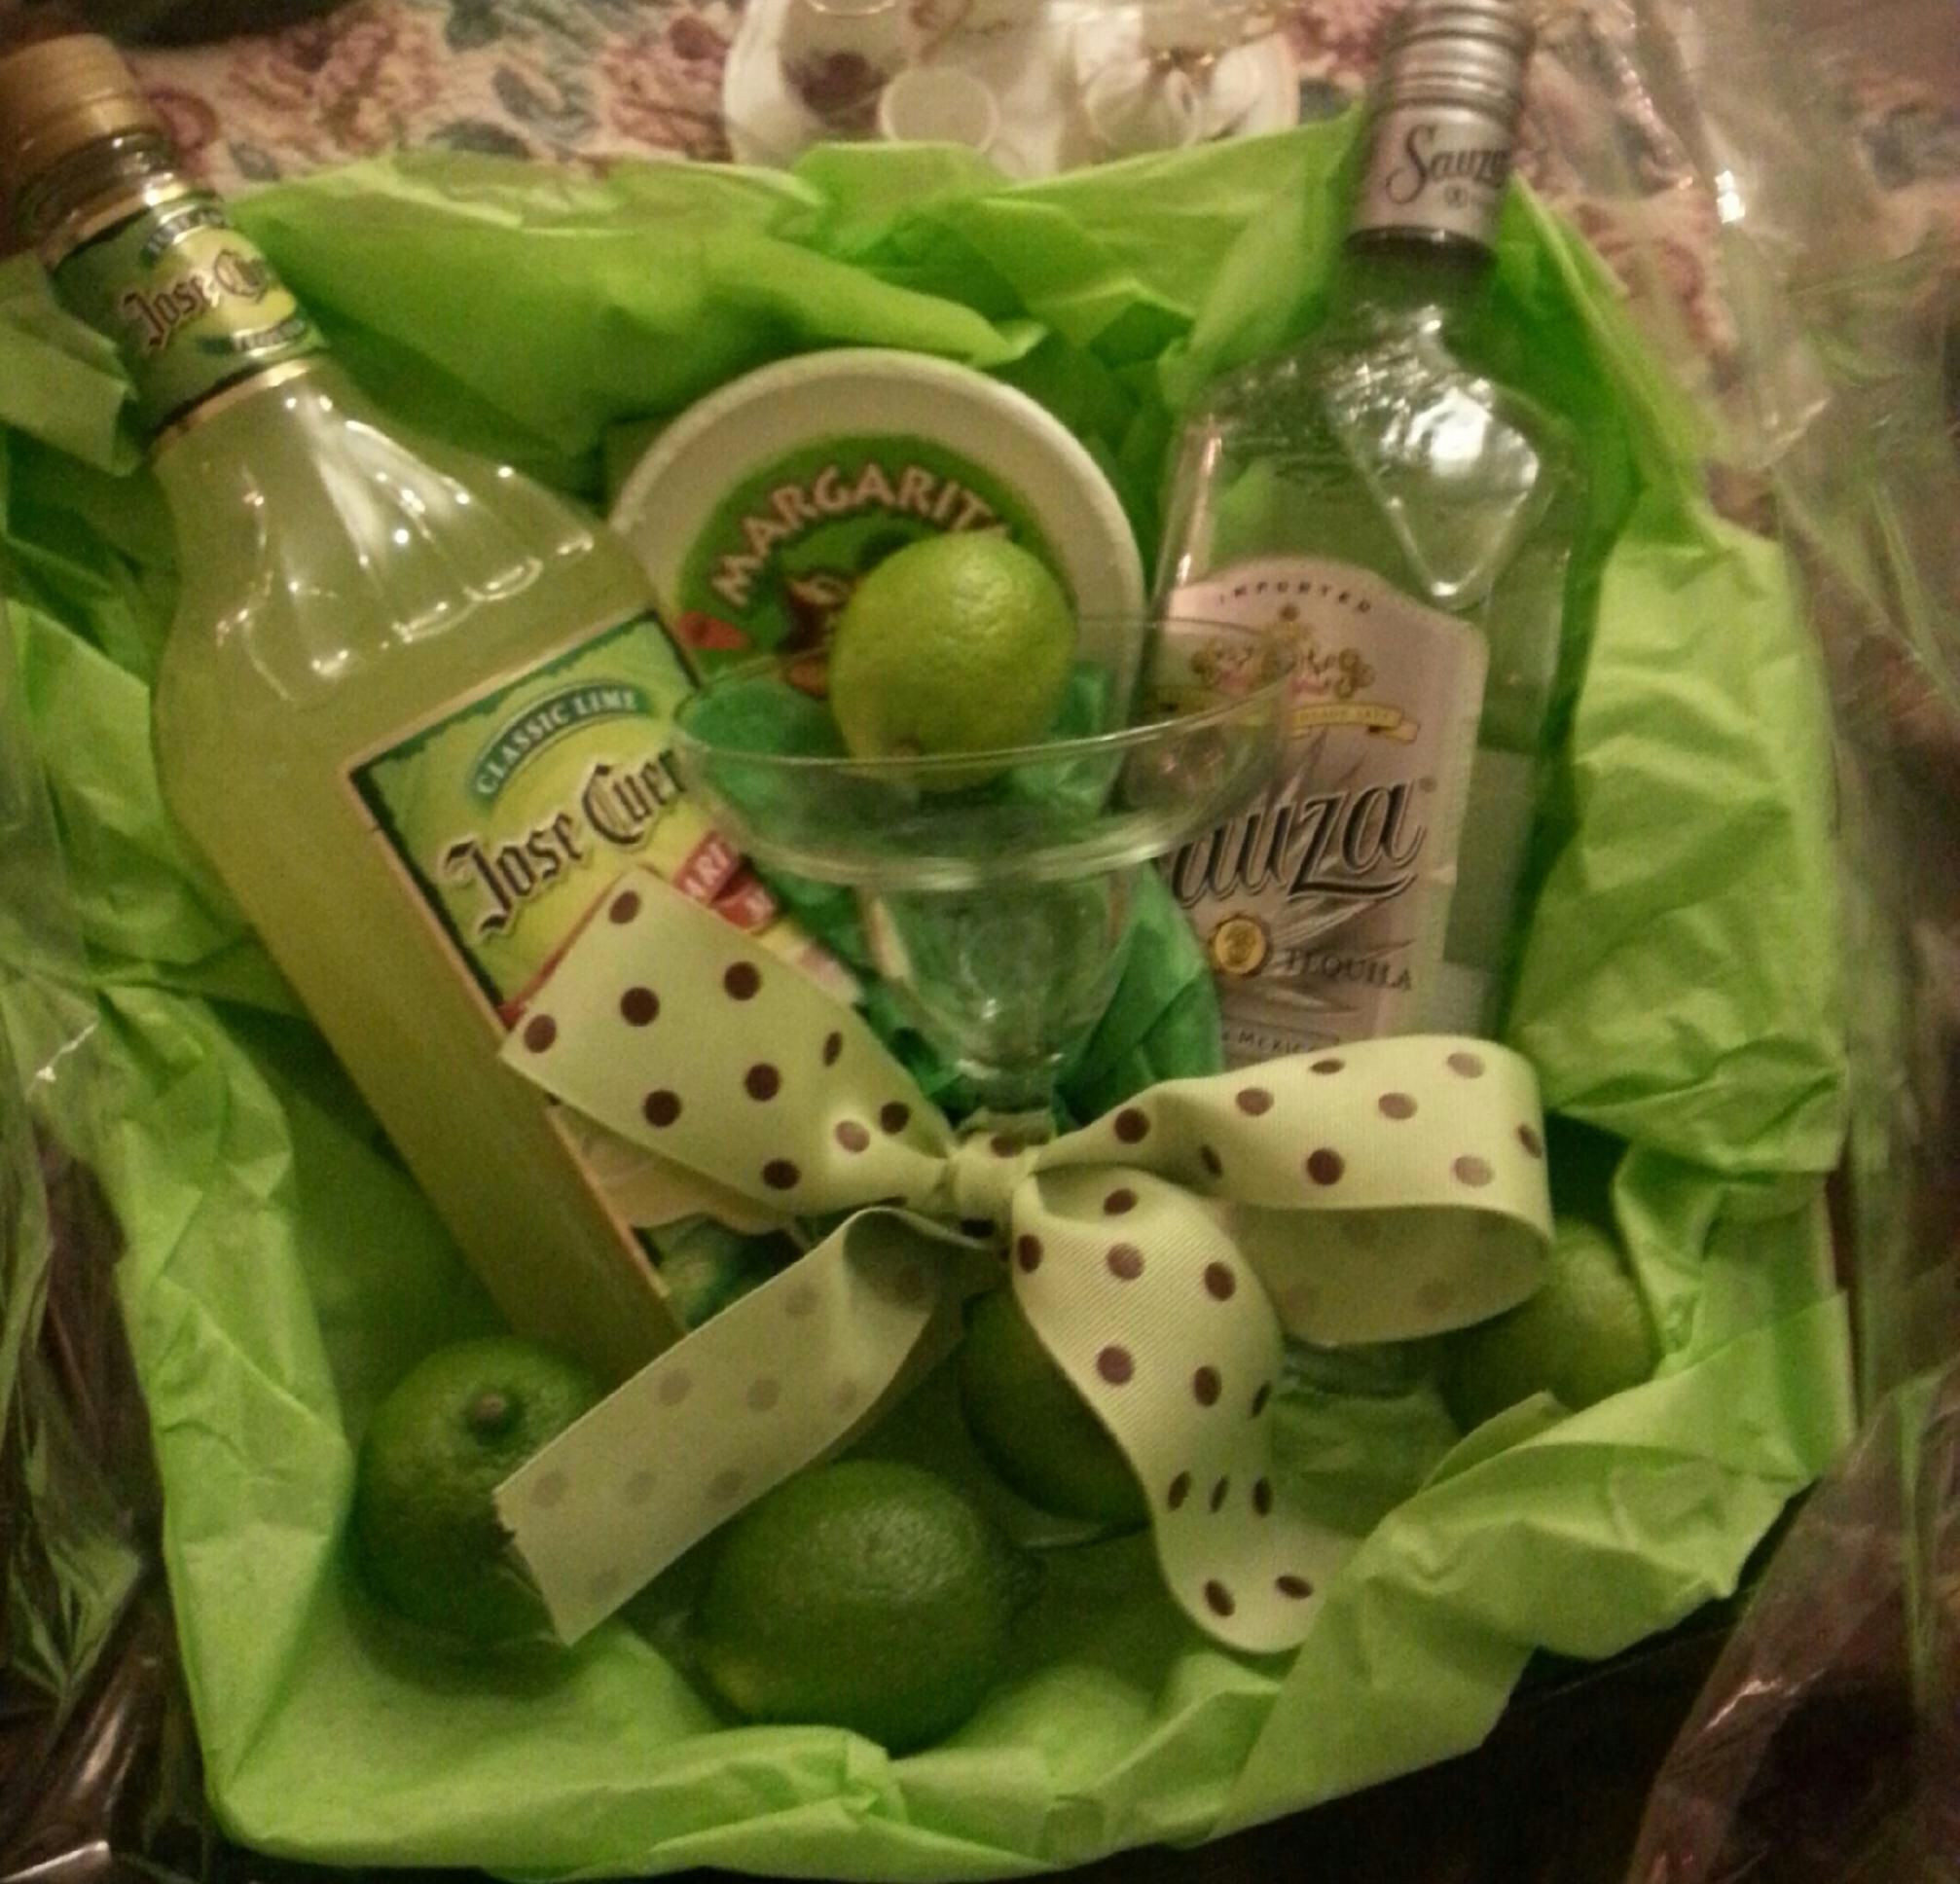 Tequila Gift Basket Ideas
 Hilarious And Awkward White Elephant Gift Ideas That Are